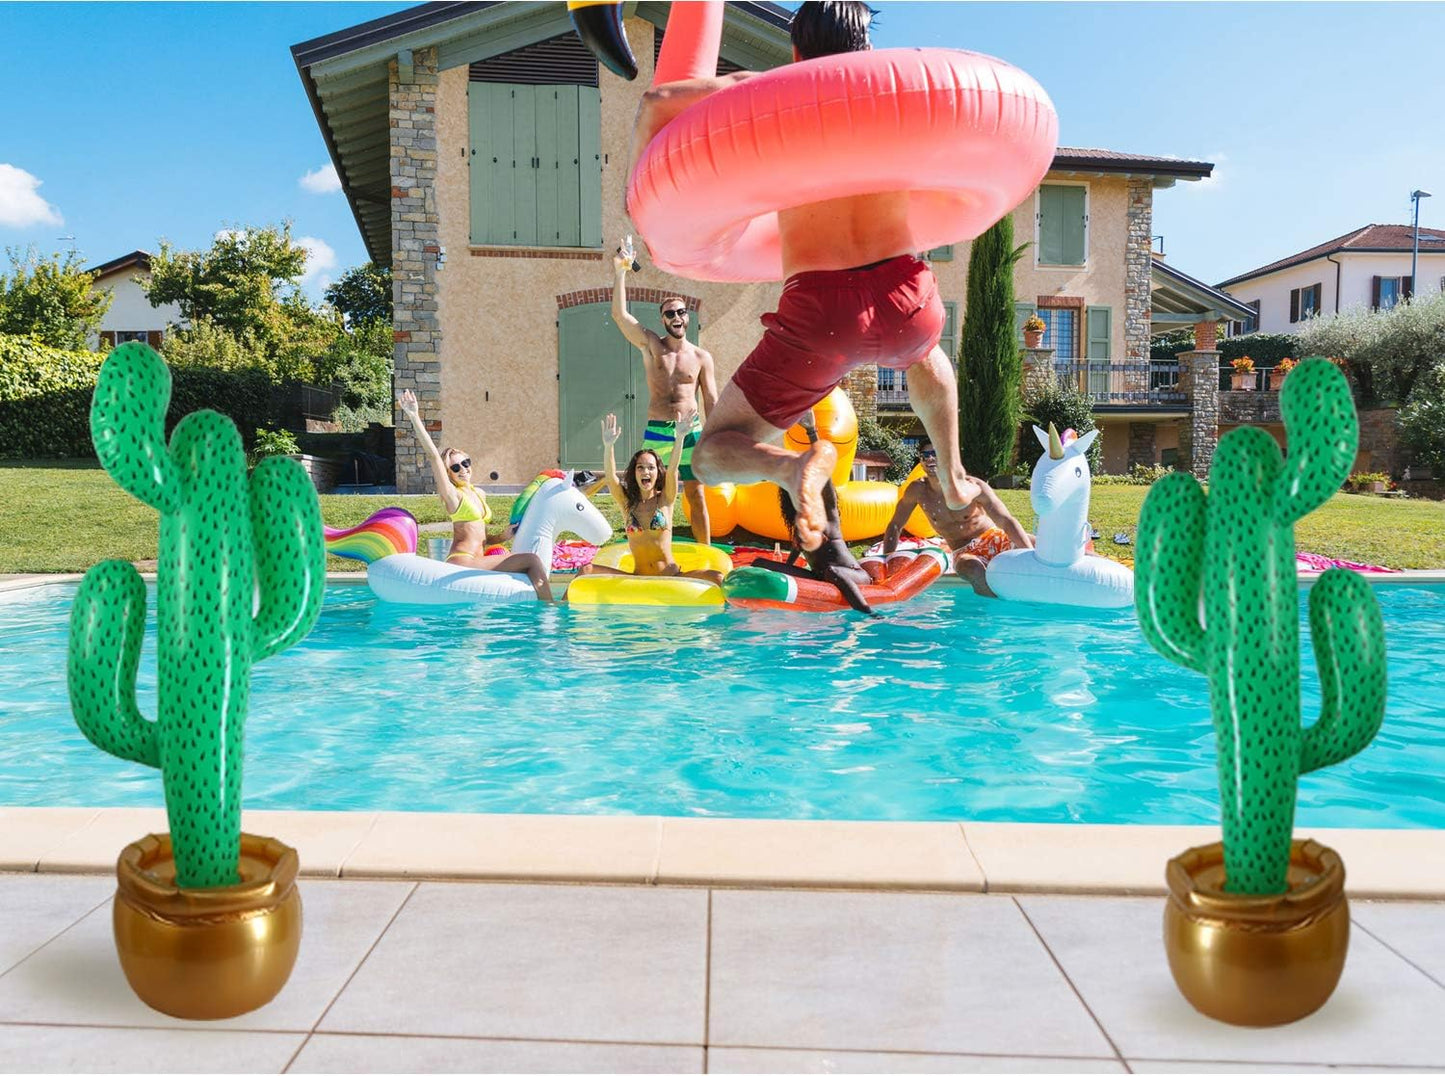 GIFTEXPRESS 36" Cactus Inflatable Prop Décor, Pack of 2